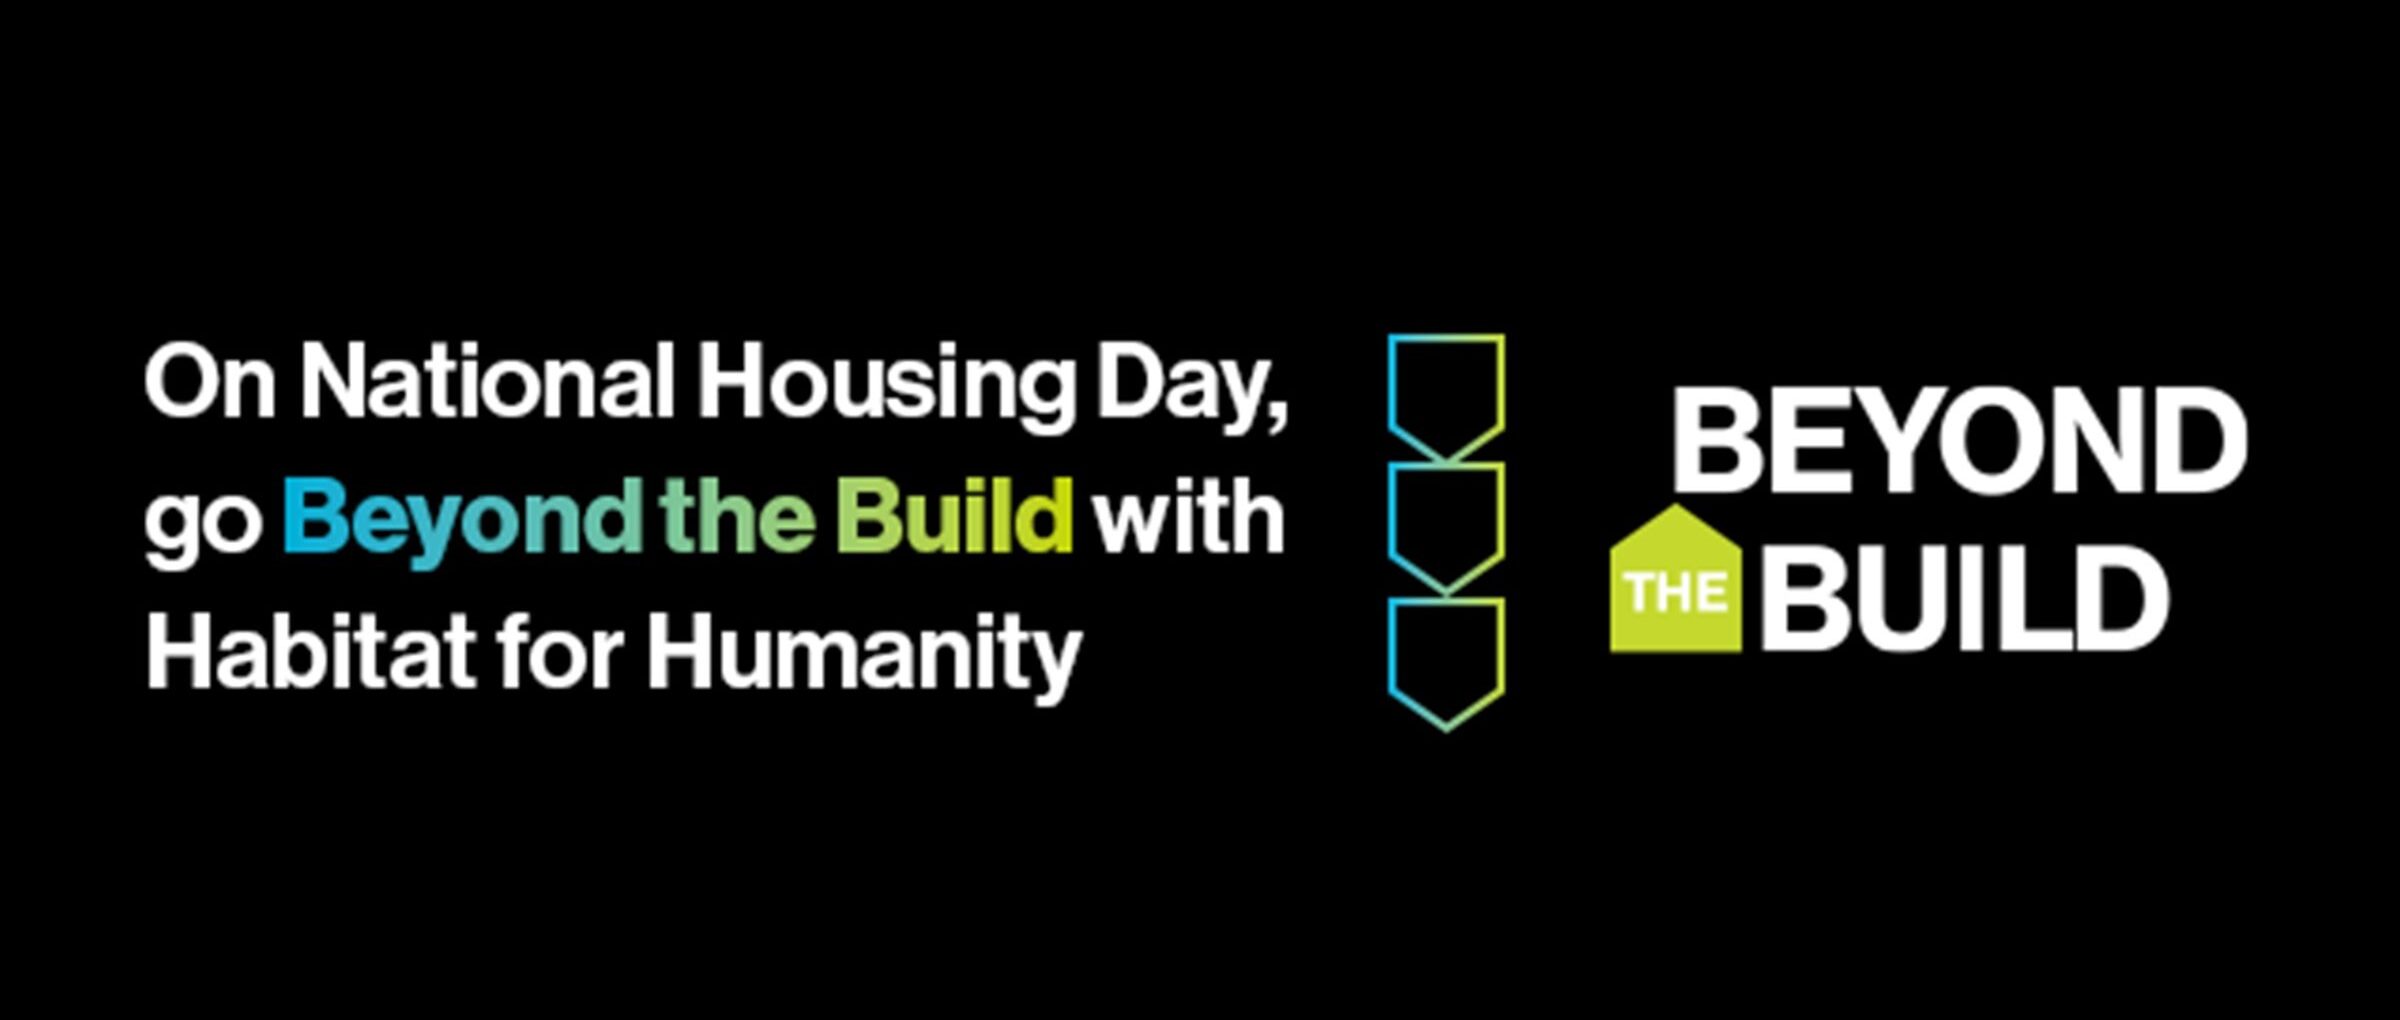 On National Housing Day, go Beyond the Build with Habitat for Humanity